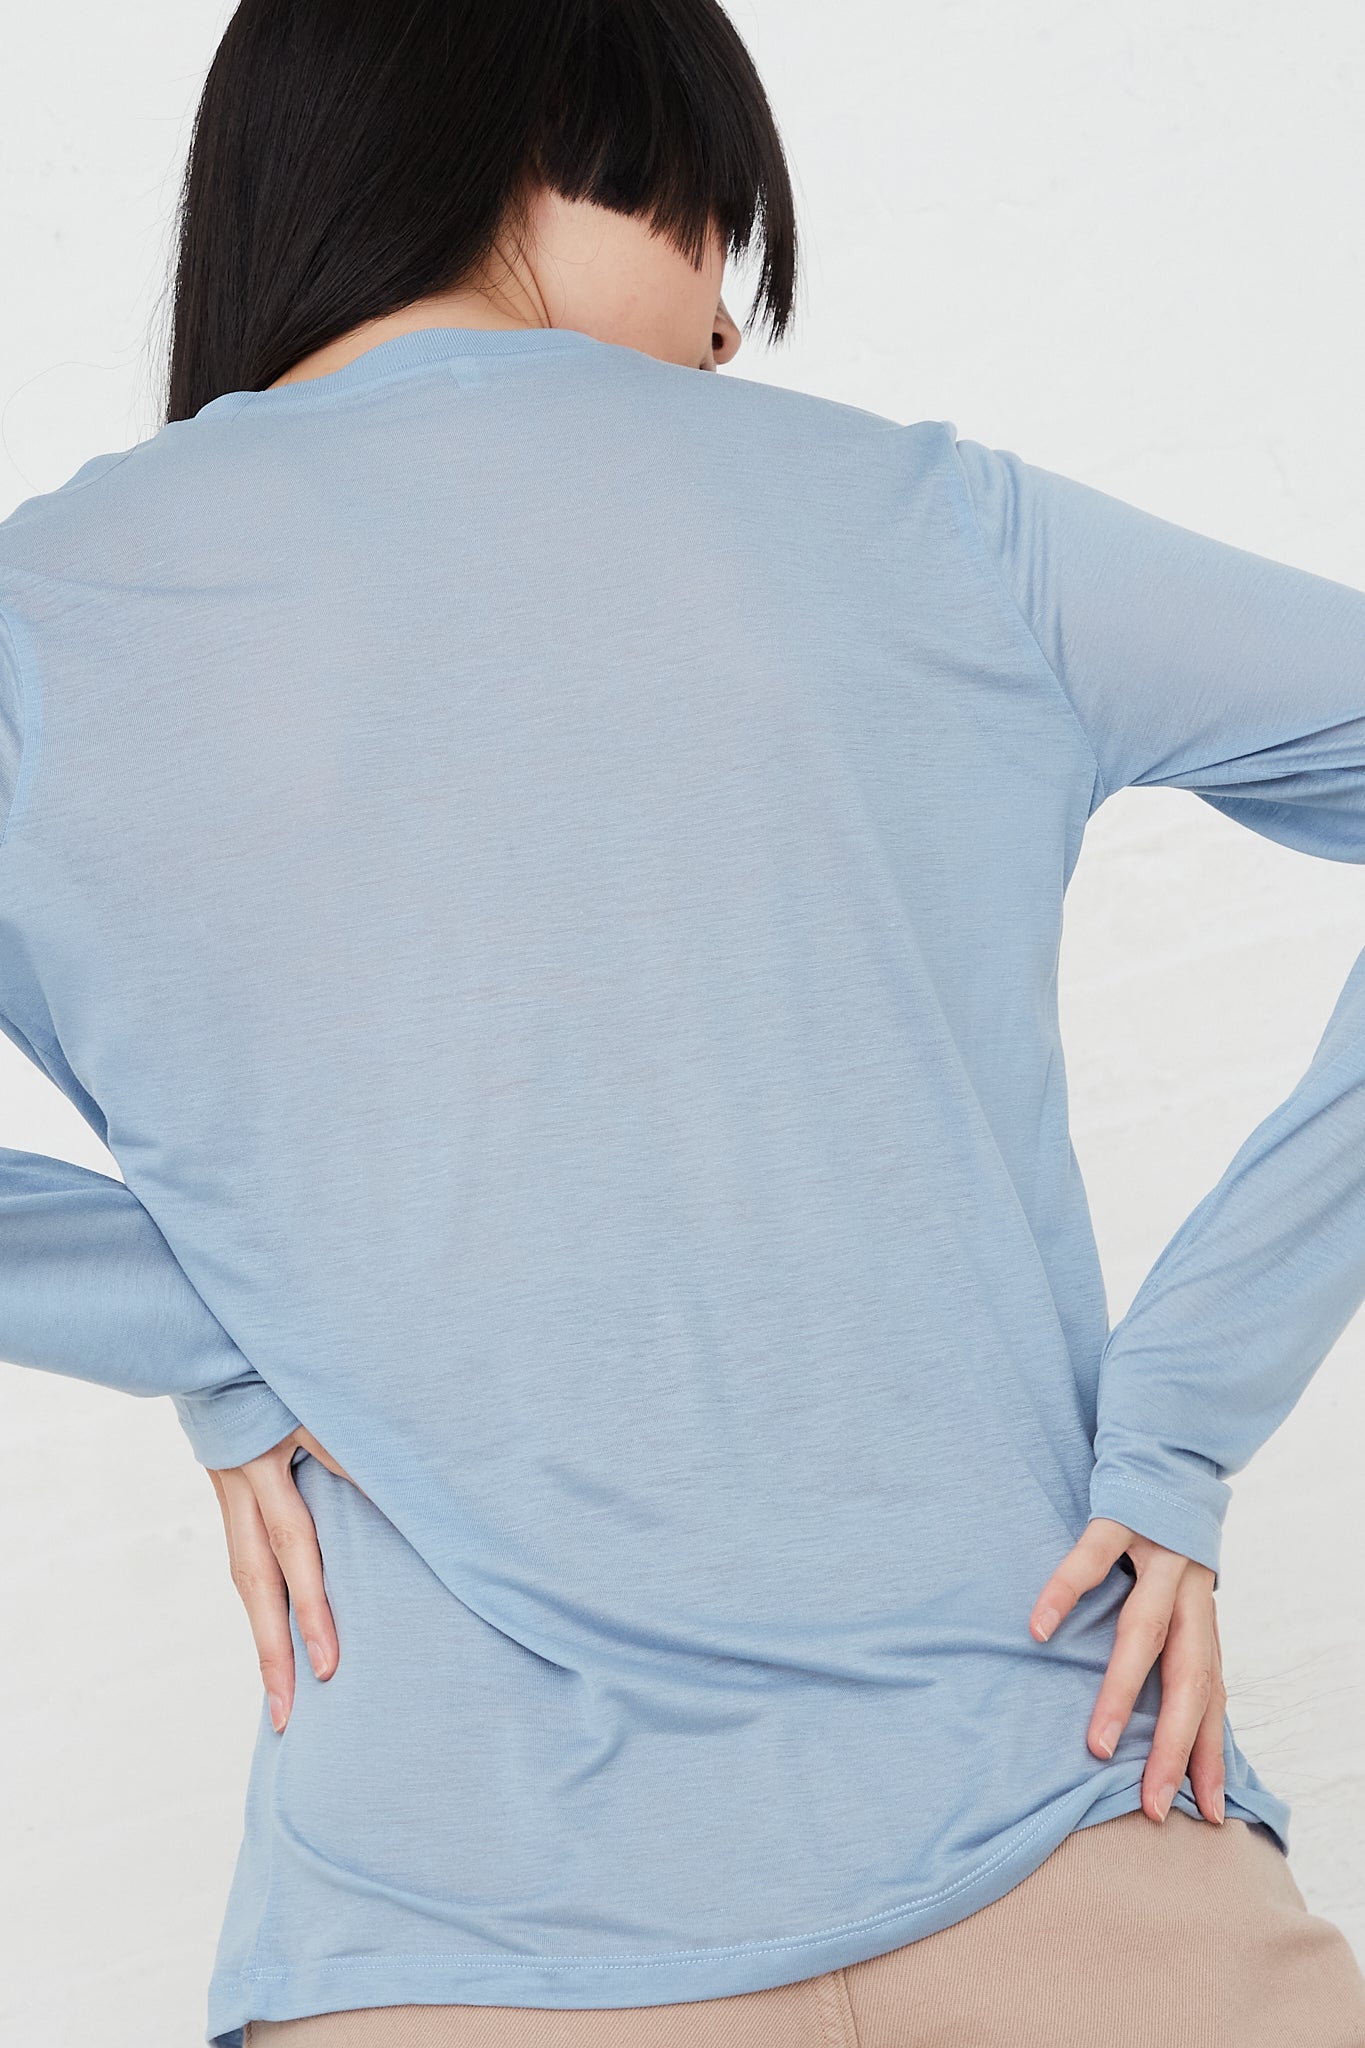 Long Sleeve Tee in Mixi Blue by Baserange  for Oroboro Back